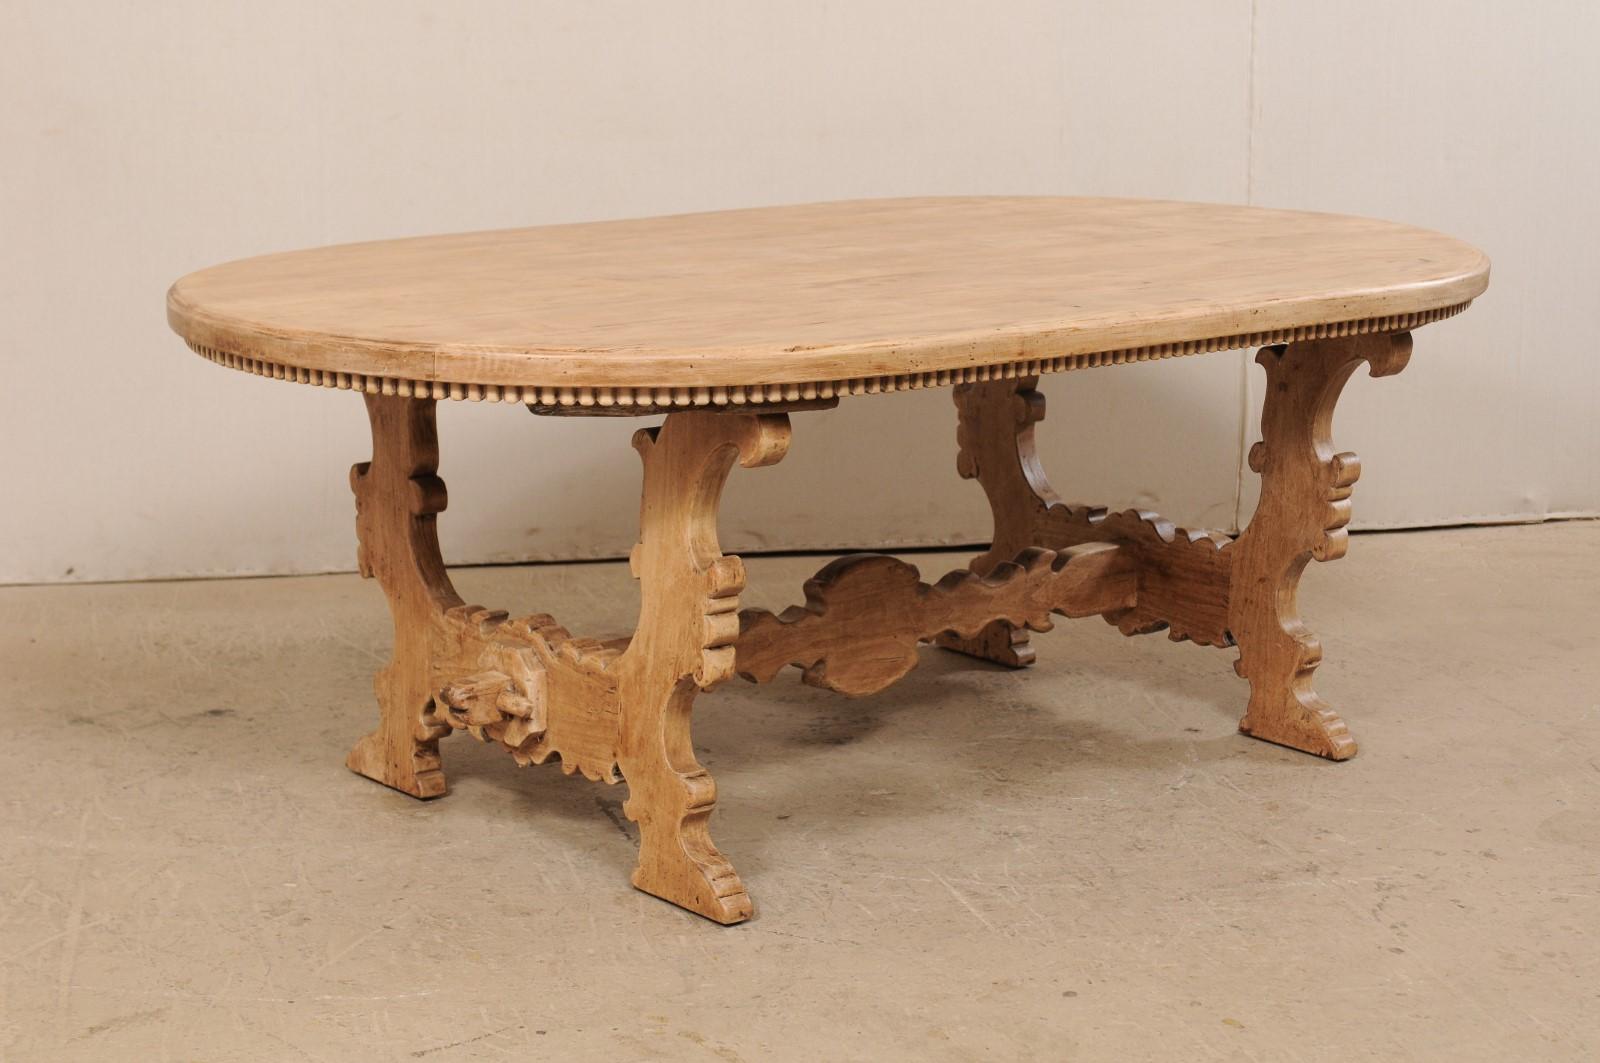 A vintage Italian-style American oval-shaped table trestle table. This shapely dining table features a 7 foot long oval-shaped top, and has an Italian inspired design with curvaceous carved lyre shaped trestle legs in a leaf-motif, with center